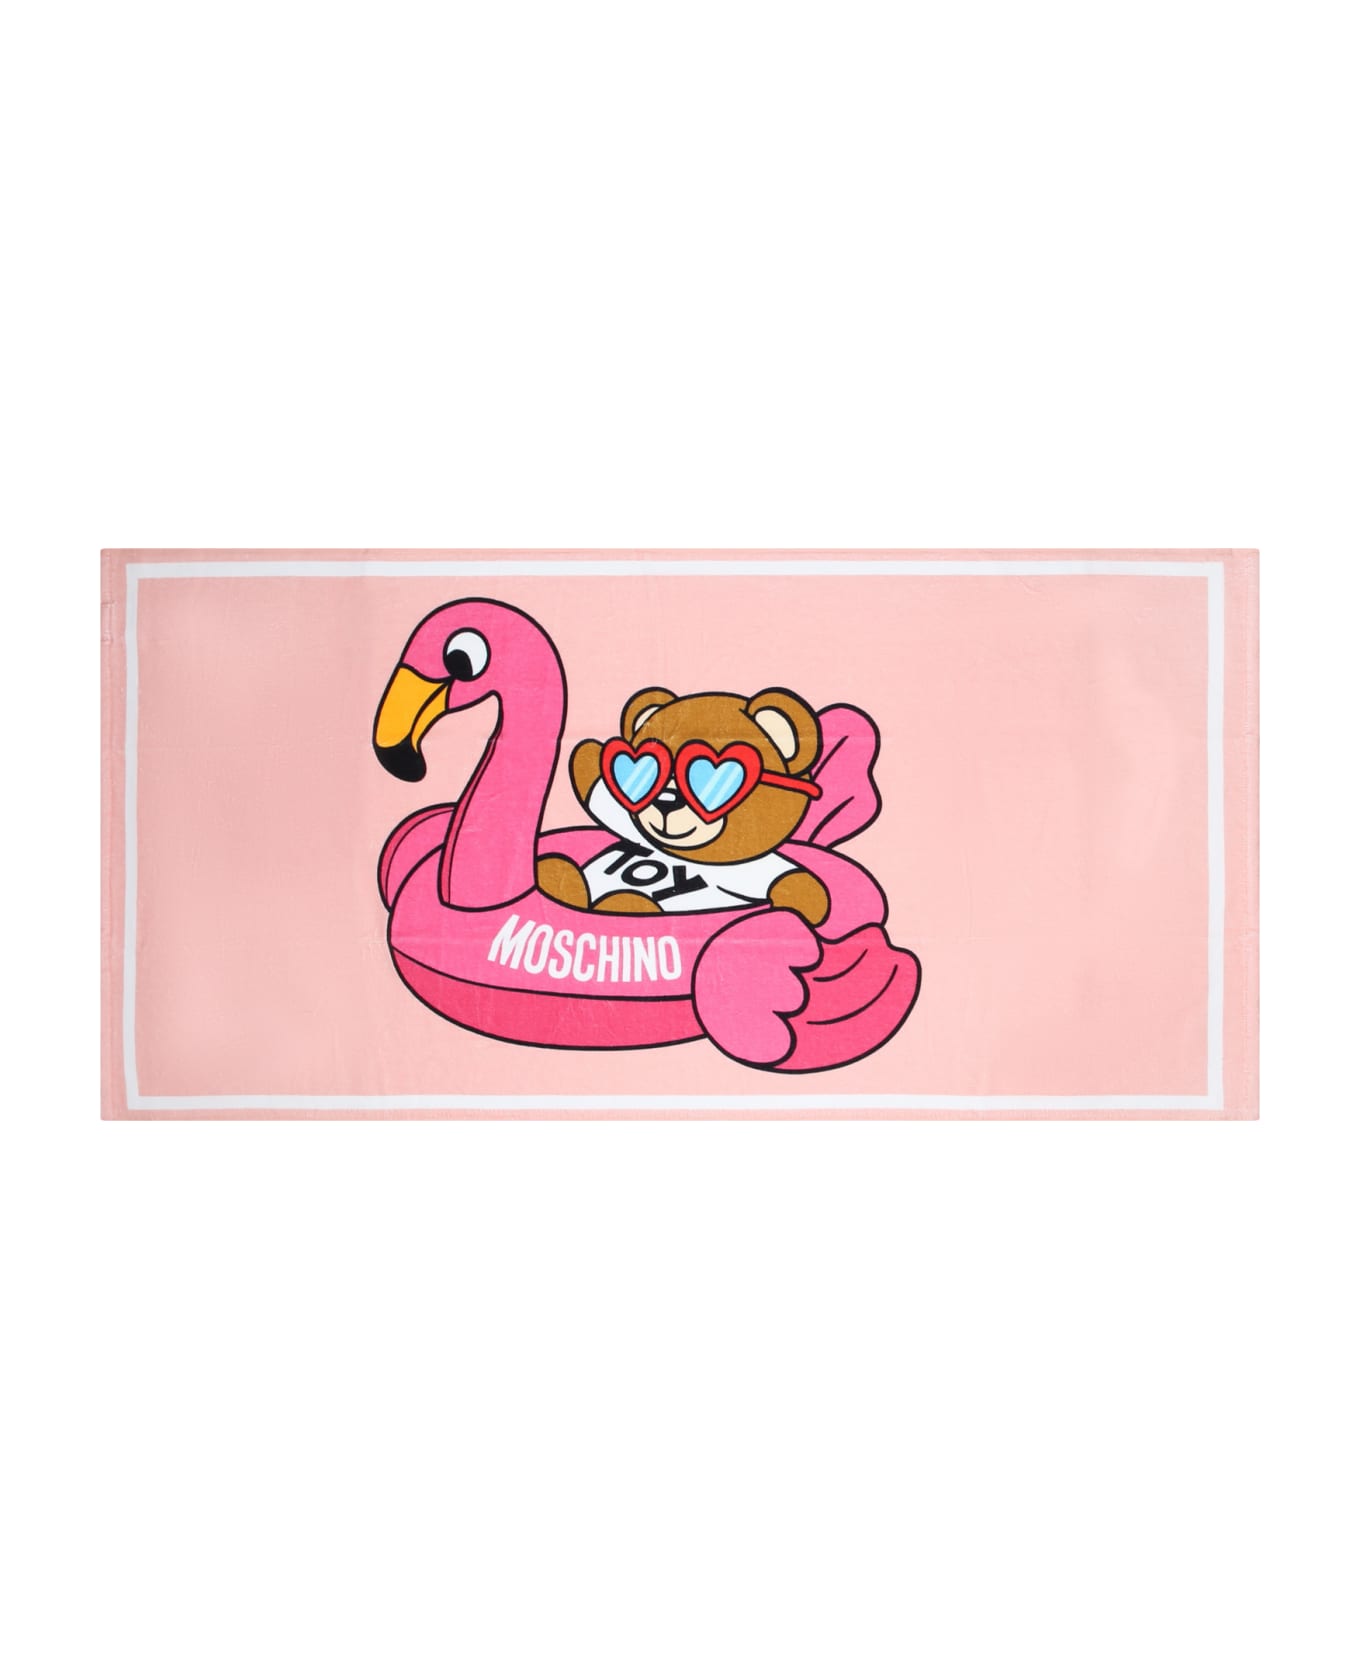 Moschino Pink Beach Towel For Girl With Teddy Bear And Flamingo - Pink